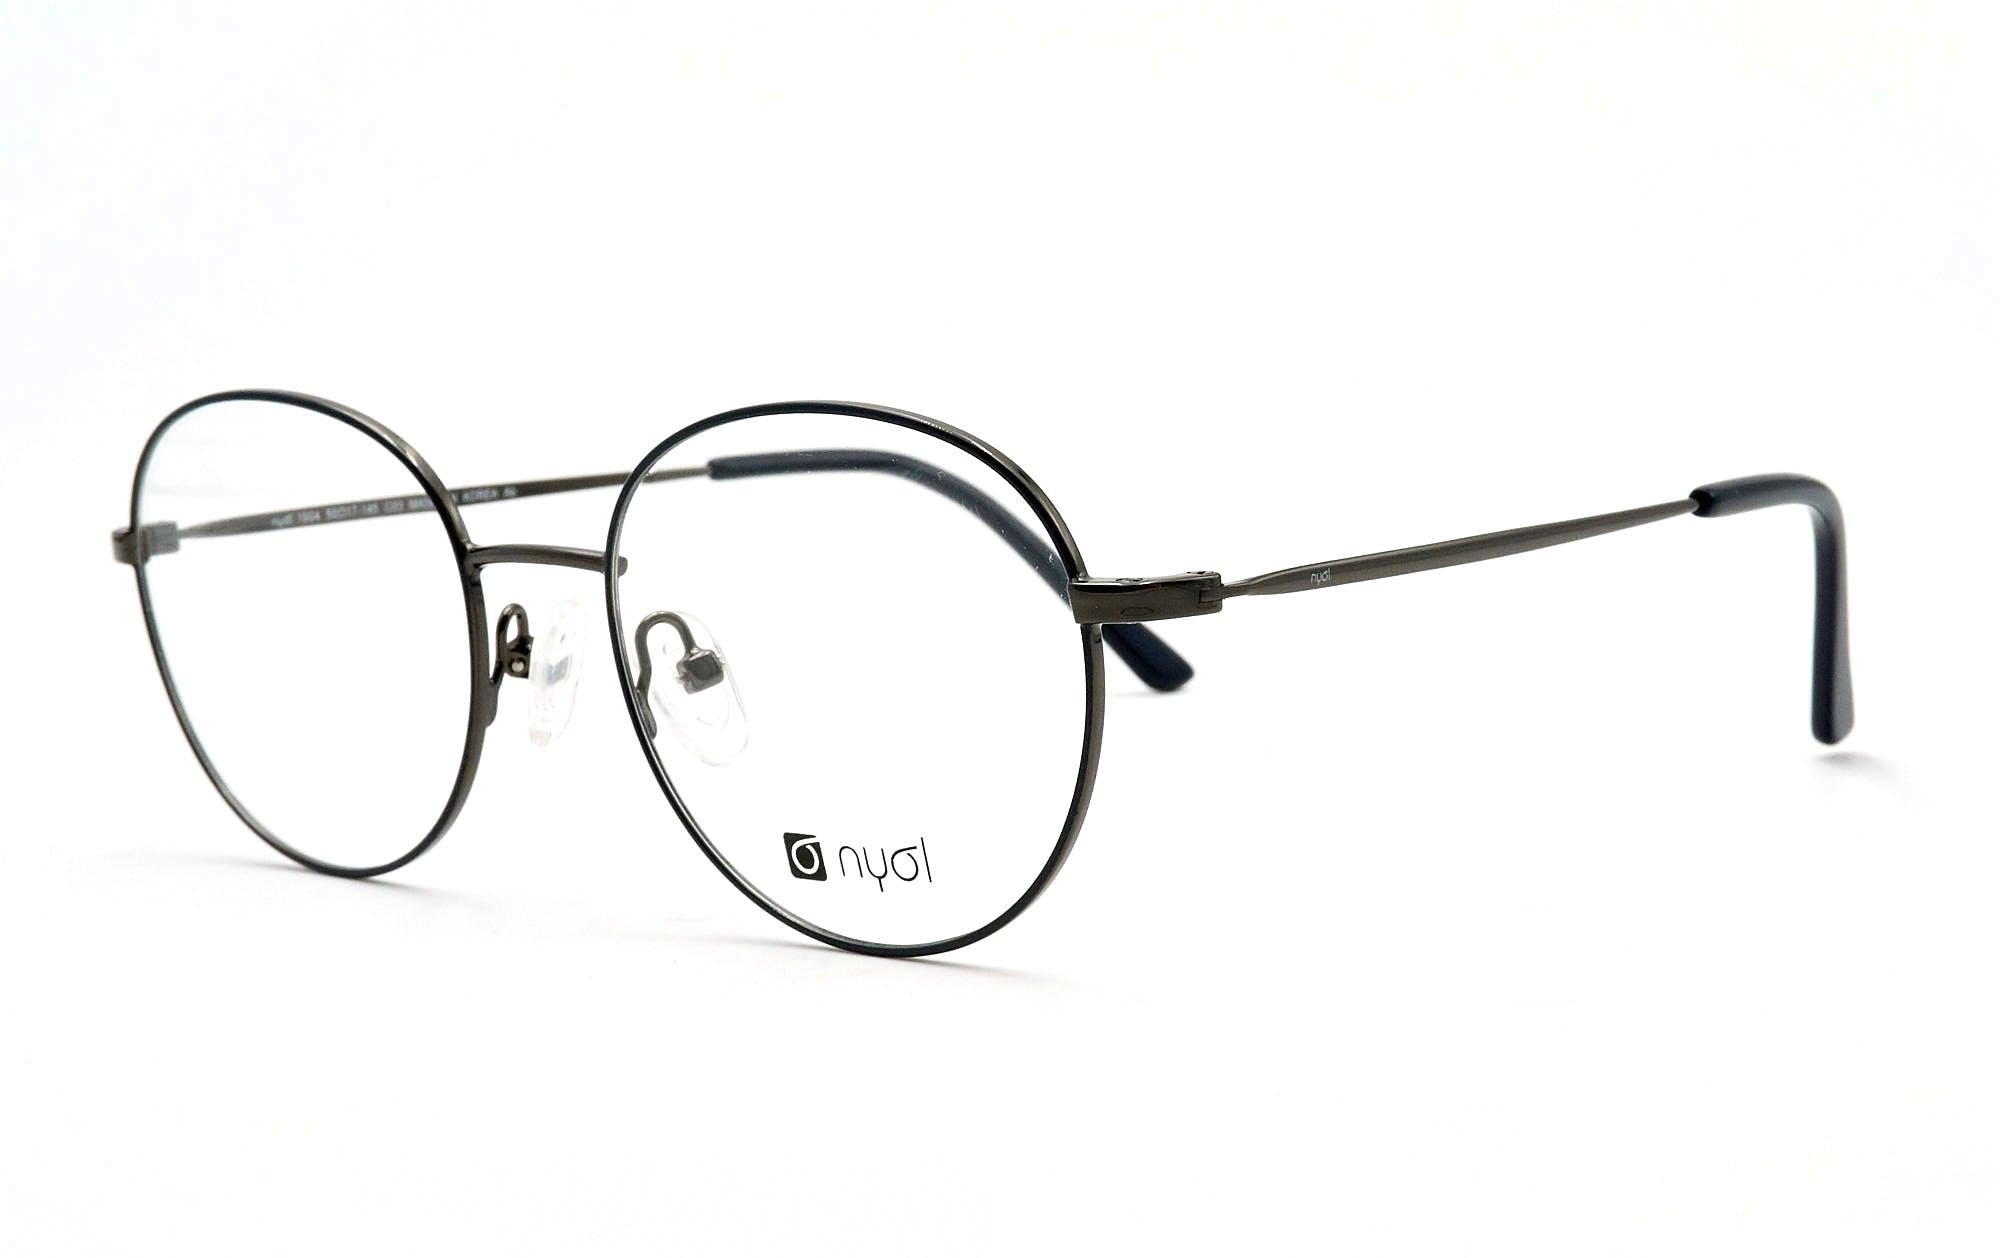 NYOL 1904 03 - Opticas Lookout